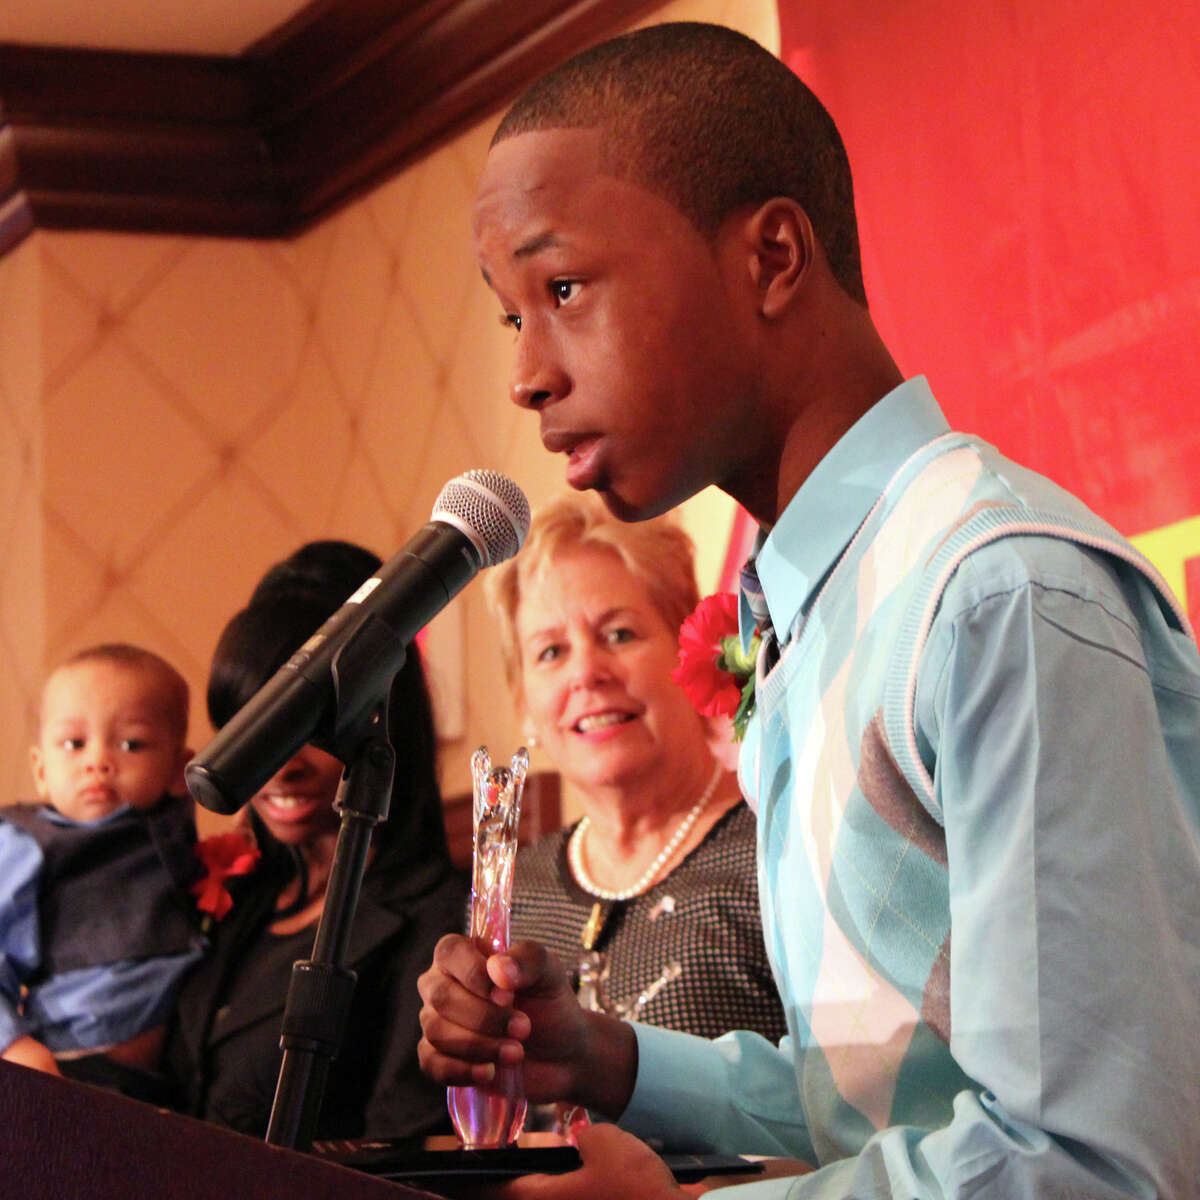 Jonathan Dorvill of Stamford explains how he and his sister Rashidah saved their baby brother, who had stopped breathing. The siblings were among the honorees at the American Red Cross "heroes'' breakfast Friday morning at the Trumbull Marriott.